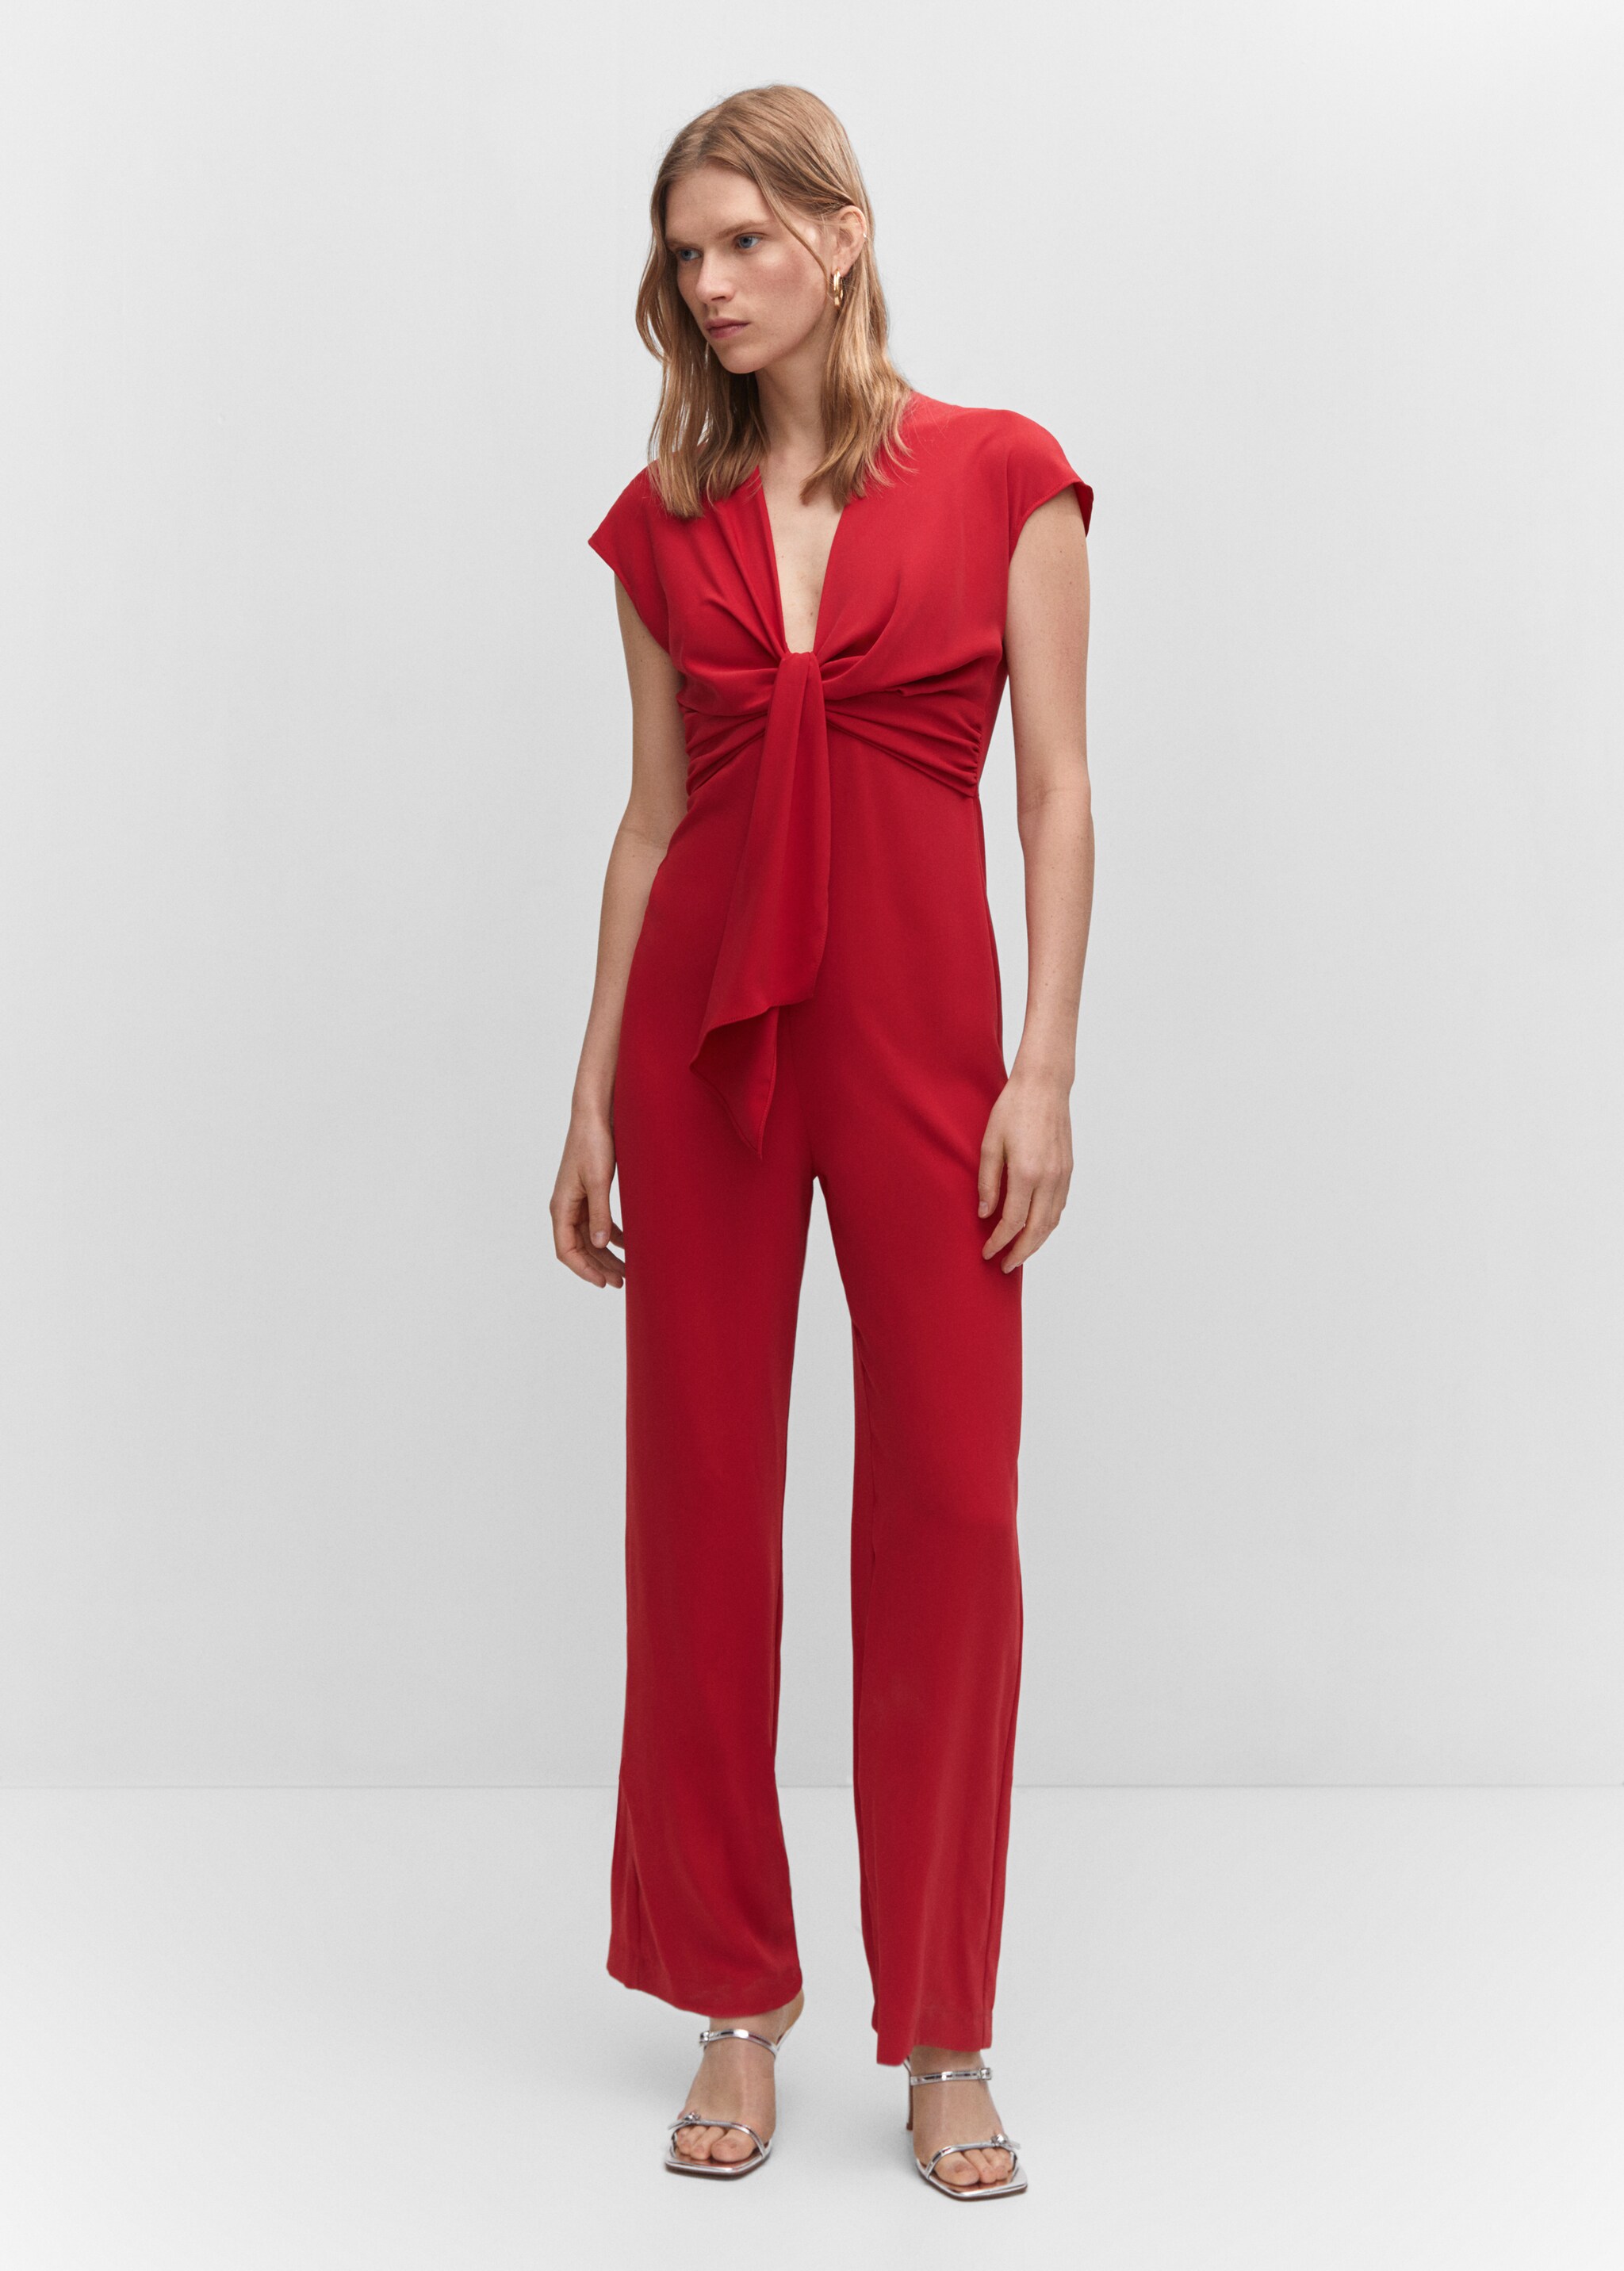 Short-sleeved jumpsuit with knot detail - General plane